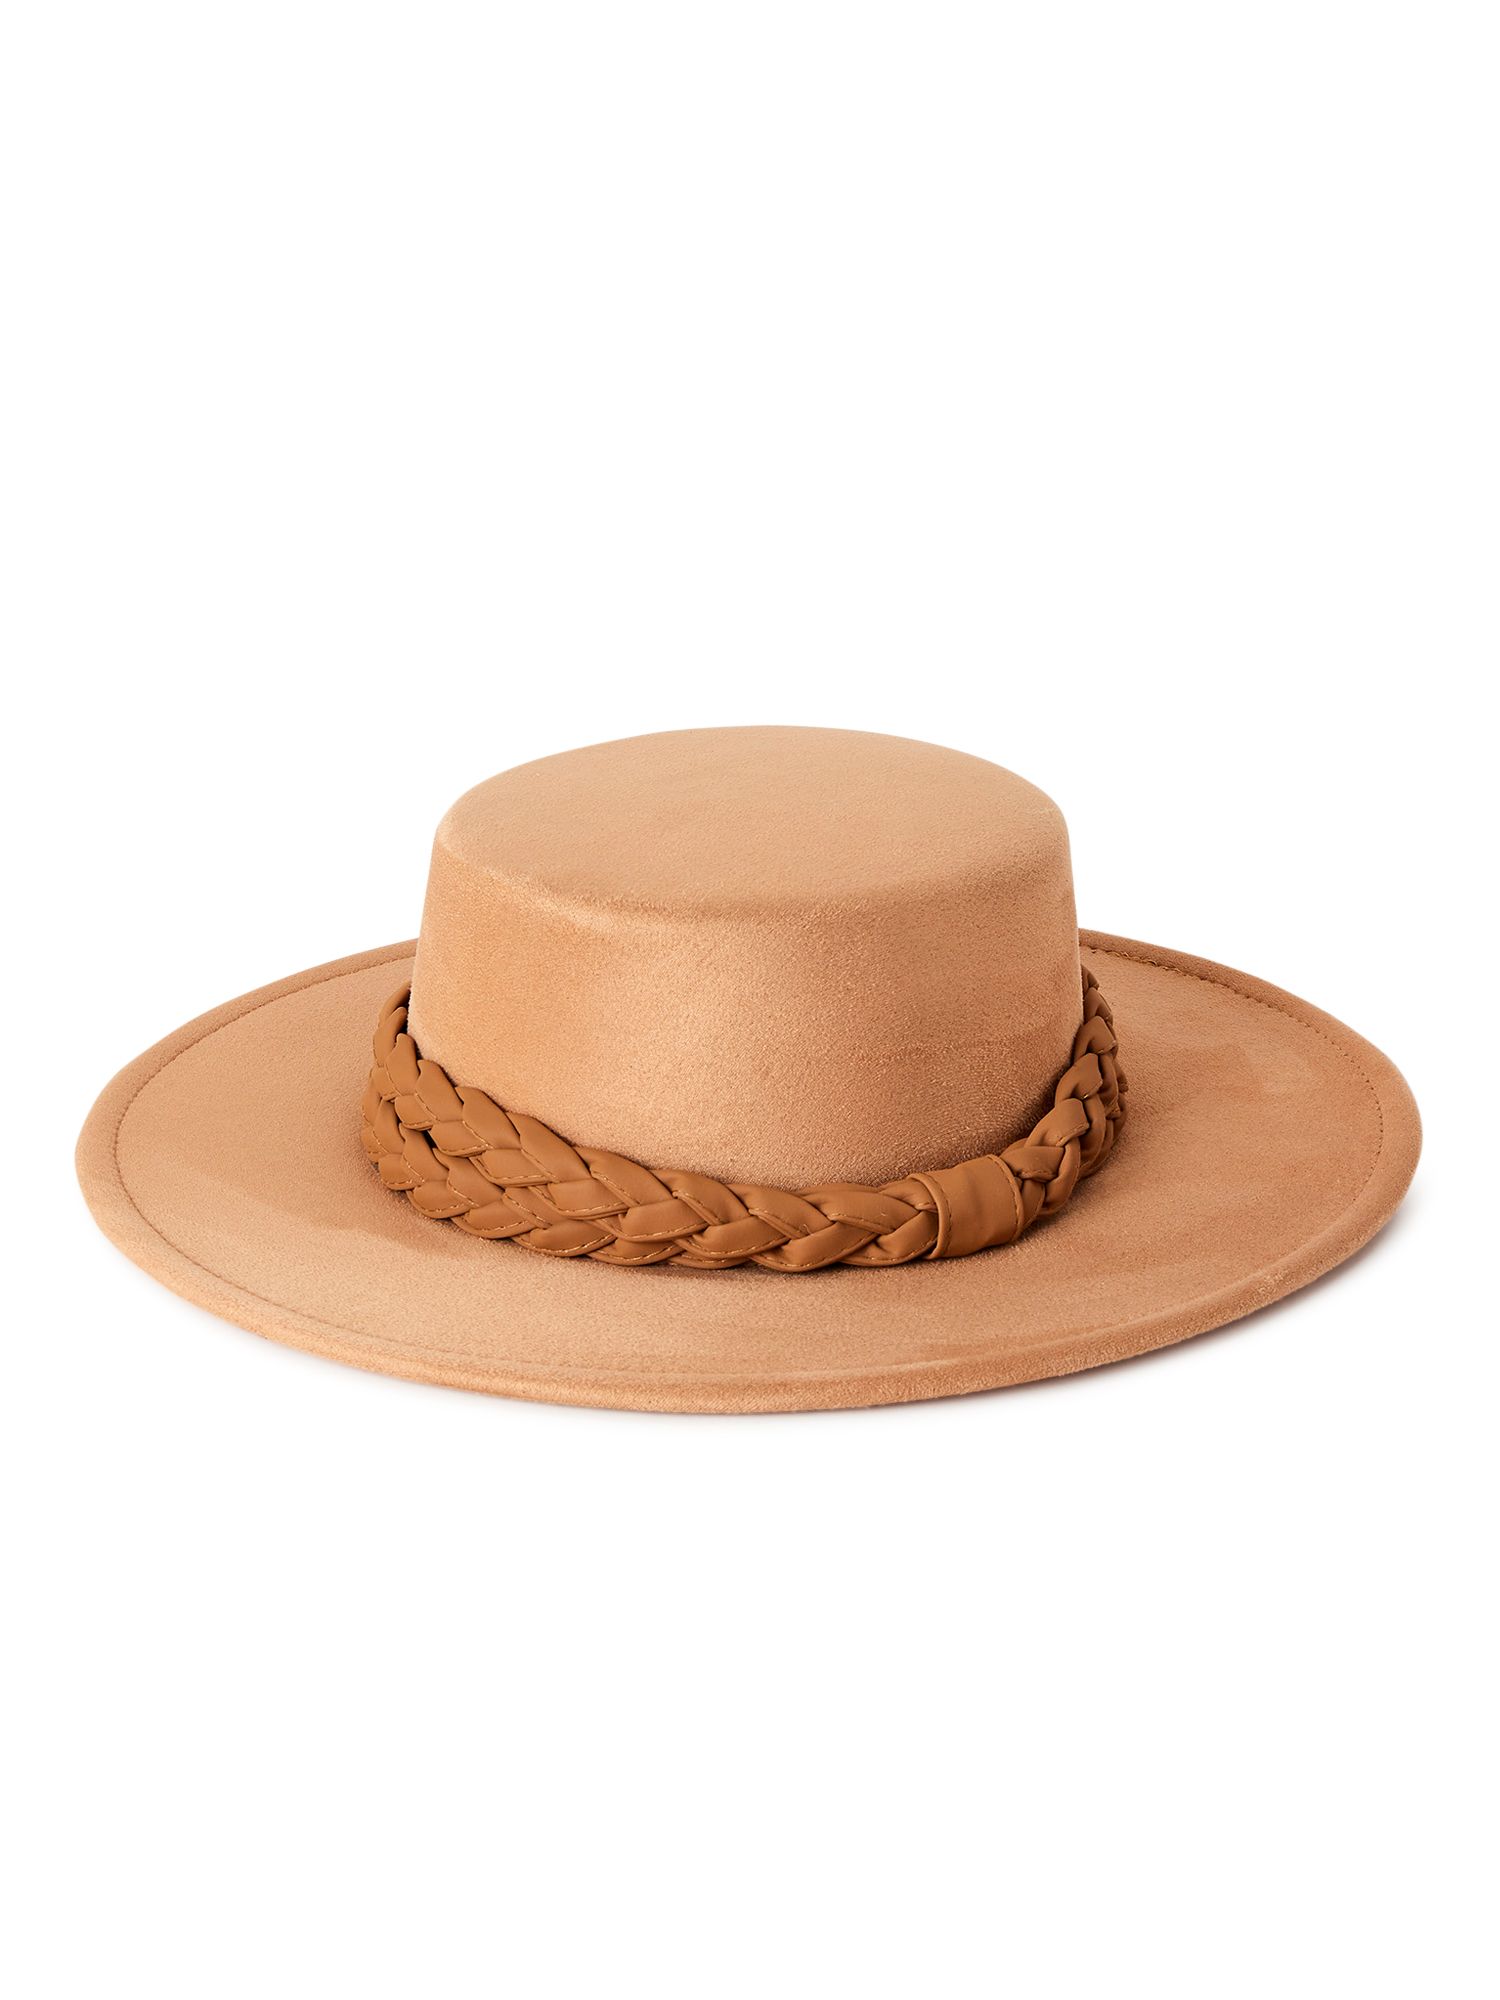 Time and Tru Adult Women's Boater Hat with Braided Trim | Walmart (US)